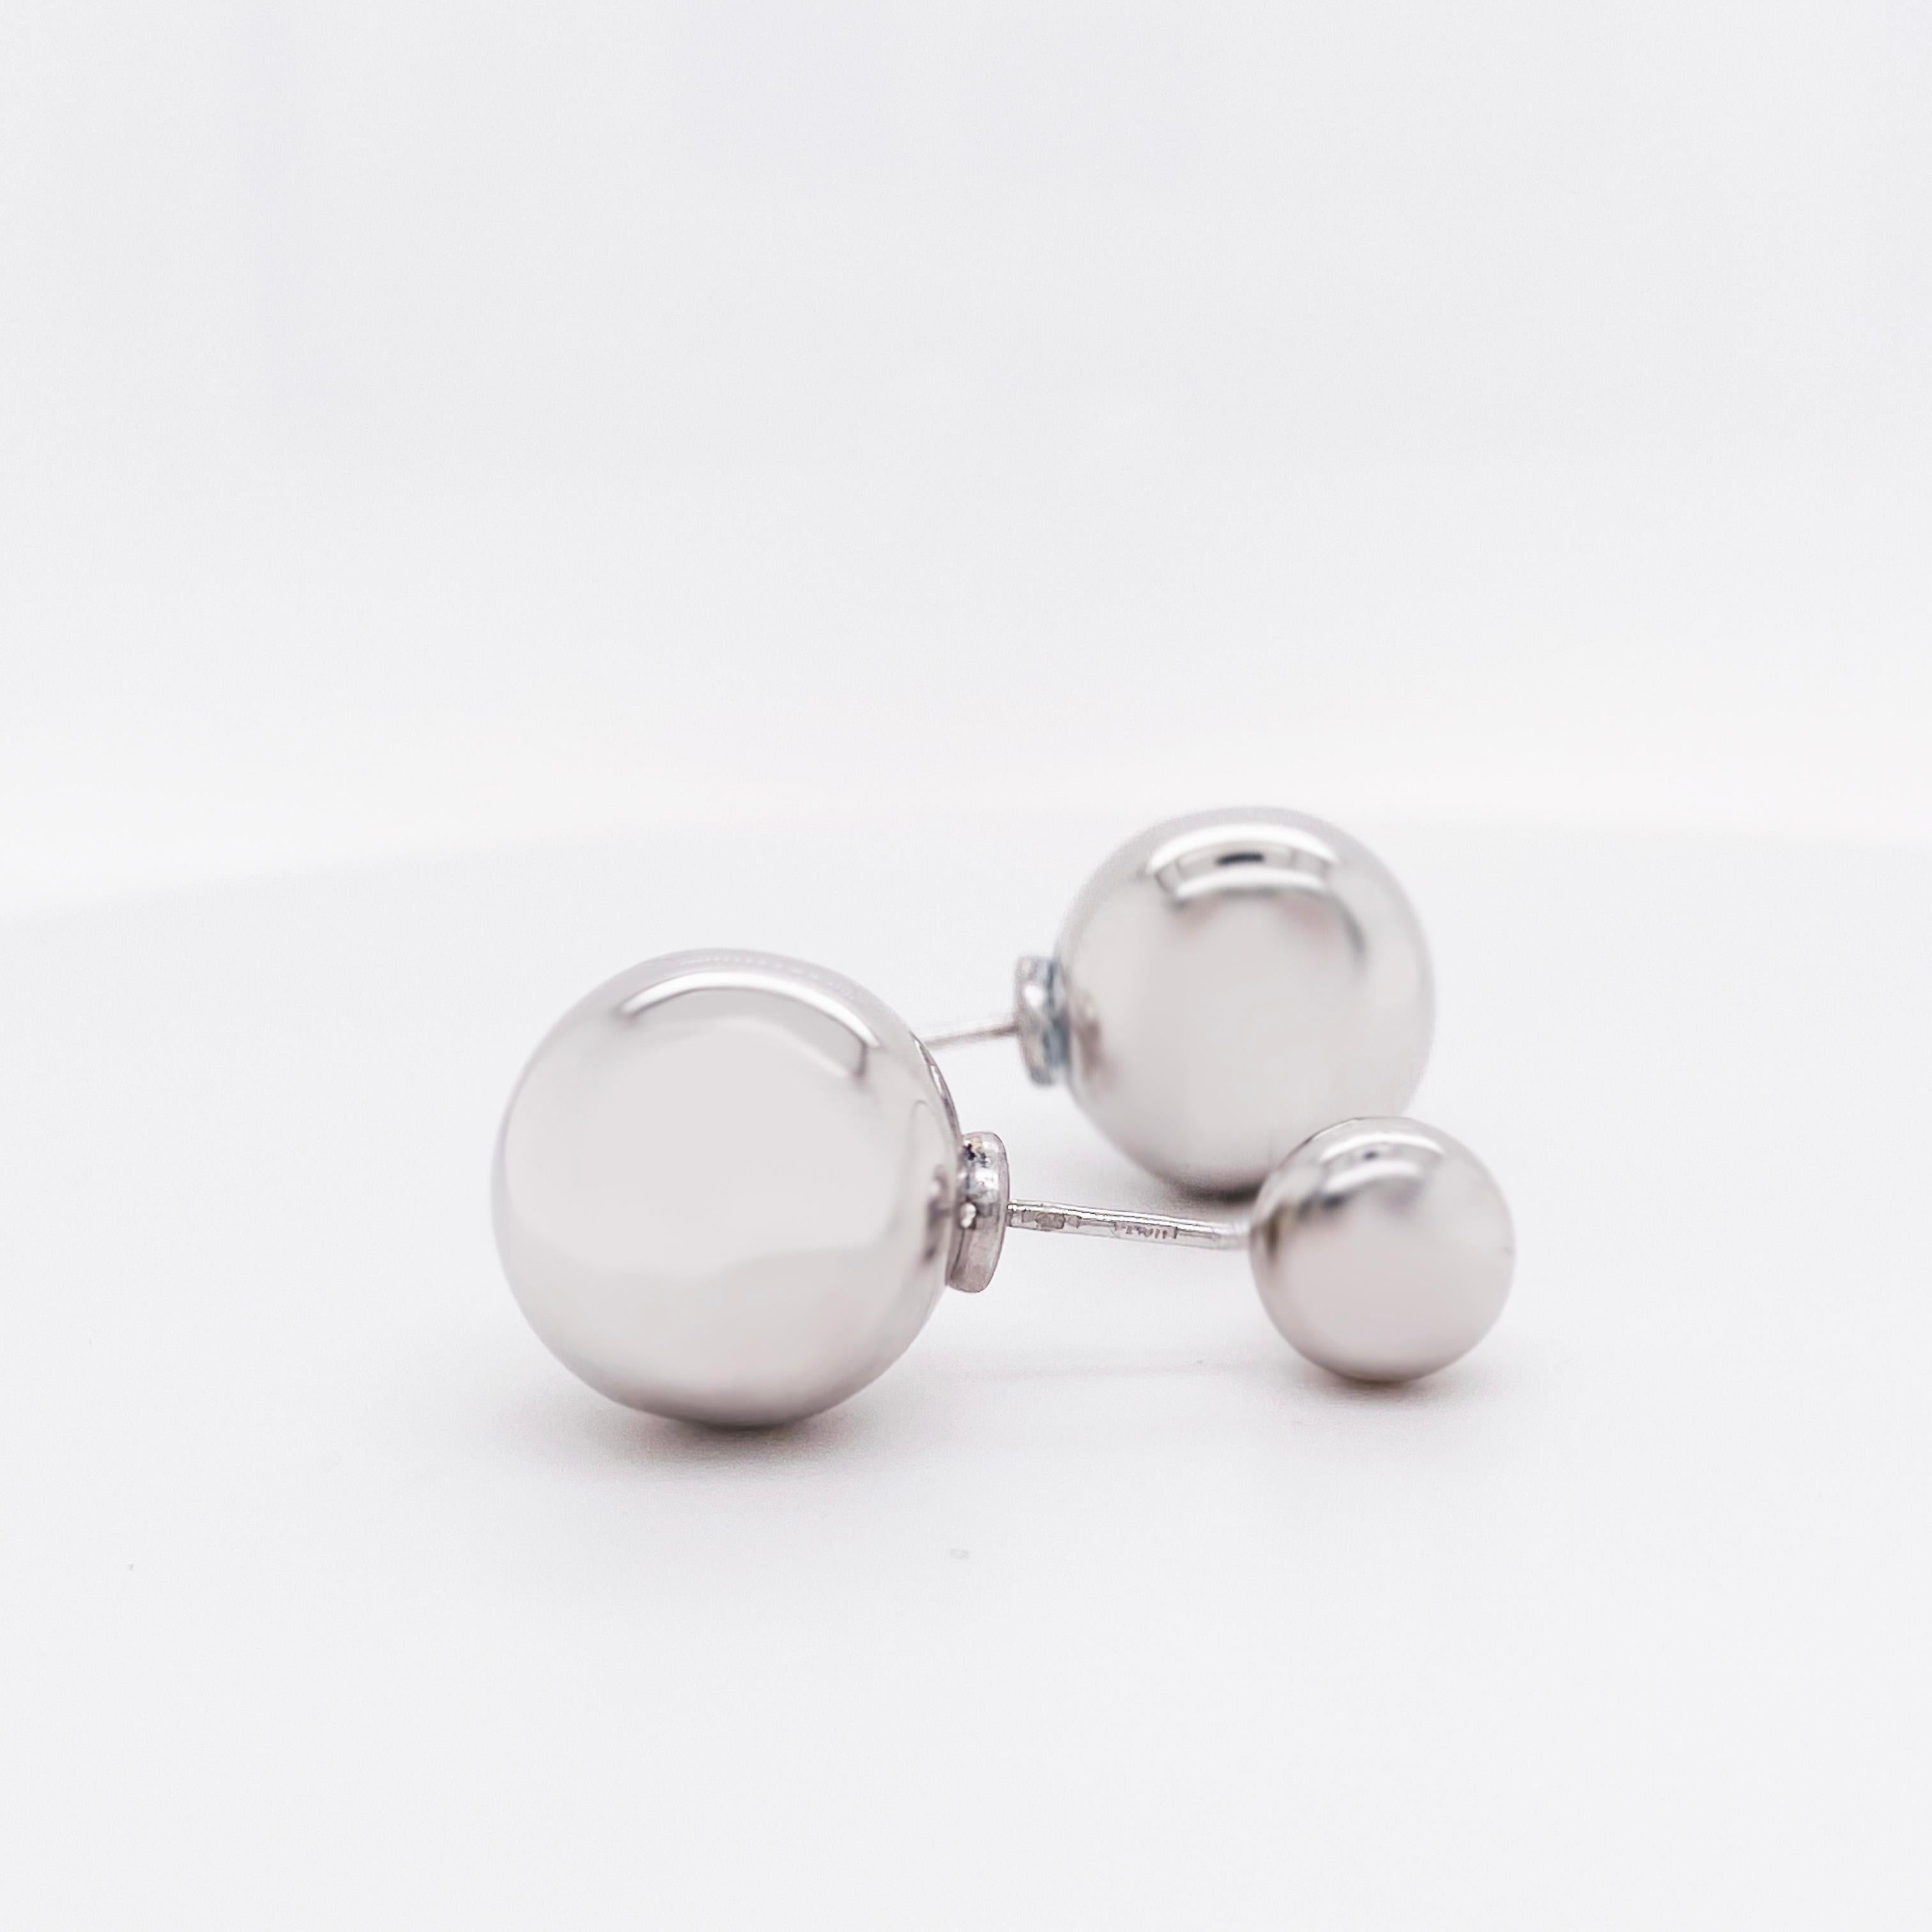 Reversible sterling silver earrings! These sterling silver ball earring studs are high polished, clean and adorable! The earrings have two different sized silver balls that can be worn either way. Wear the smaller size on top for a cute, every day